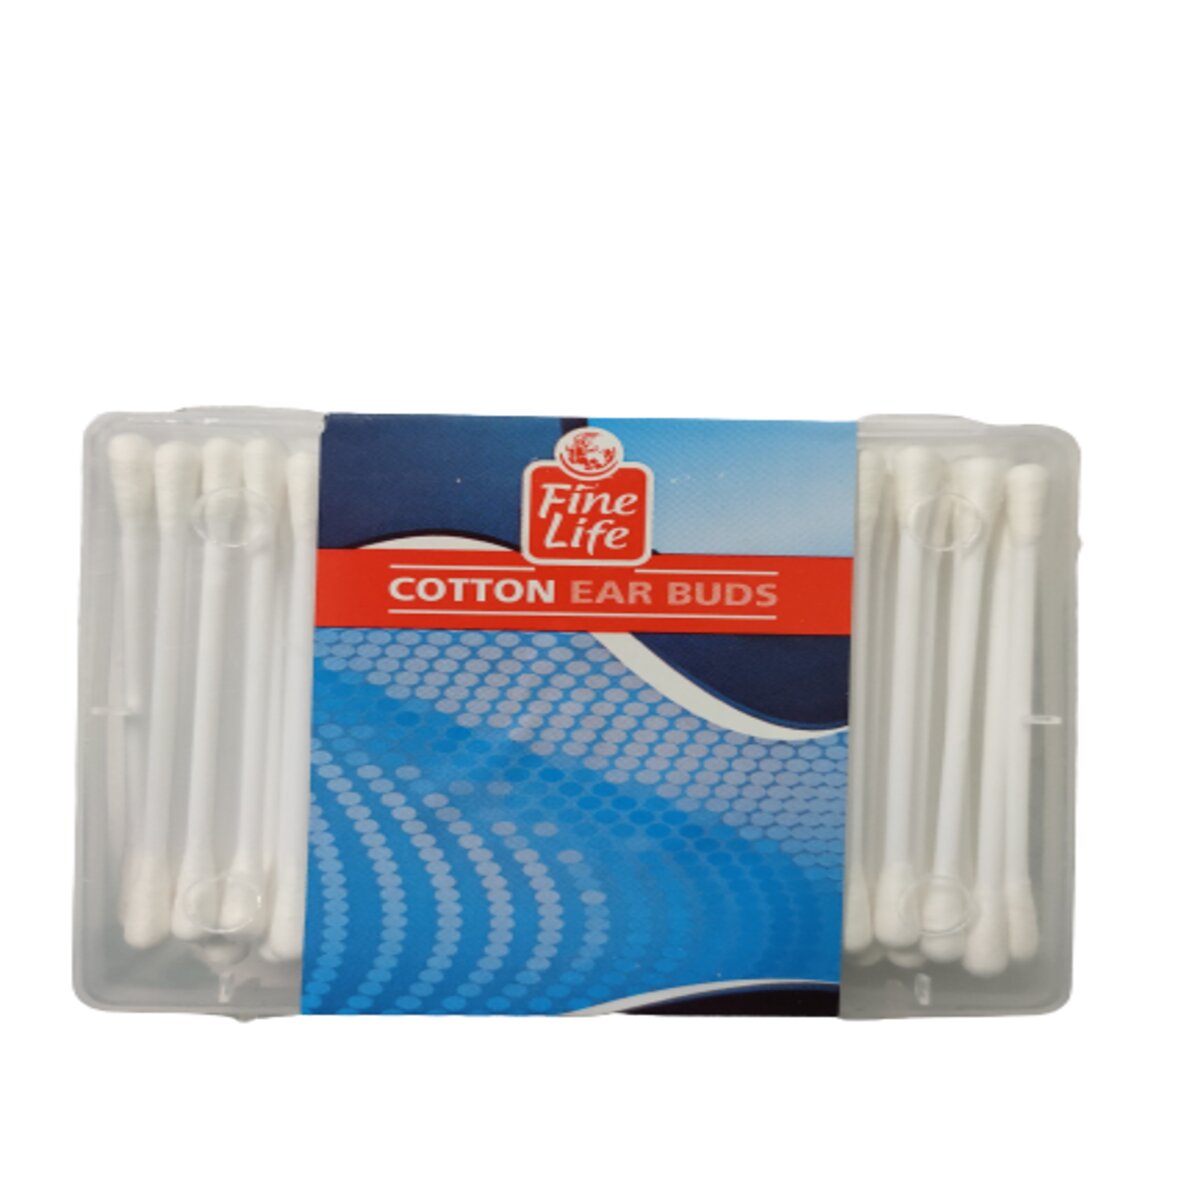 ]Finelife Cotton Ear Buds - 200N